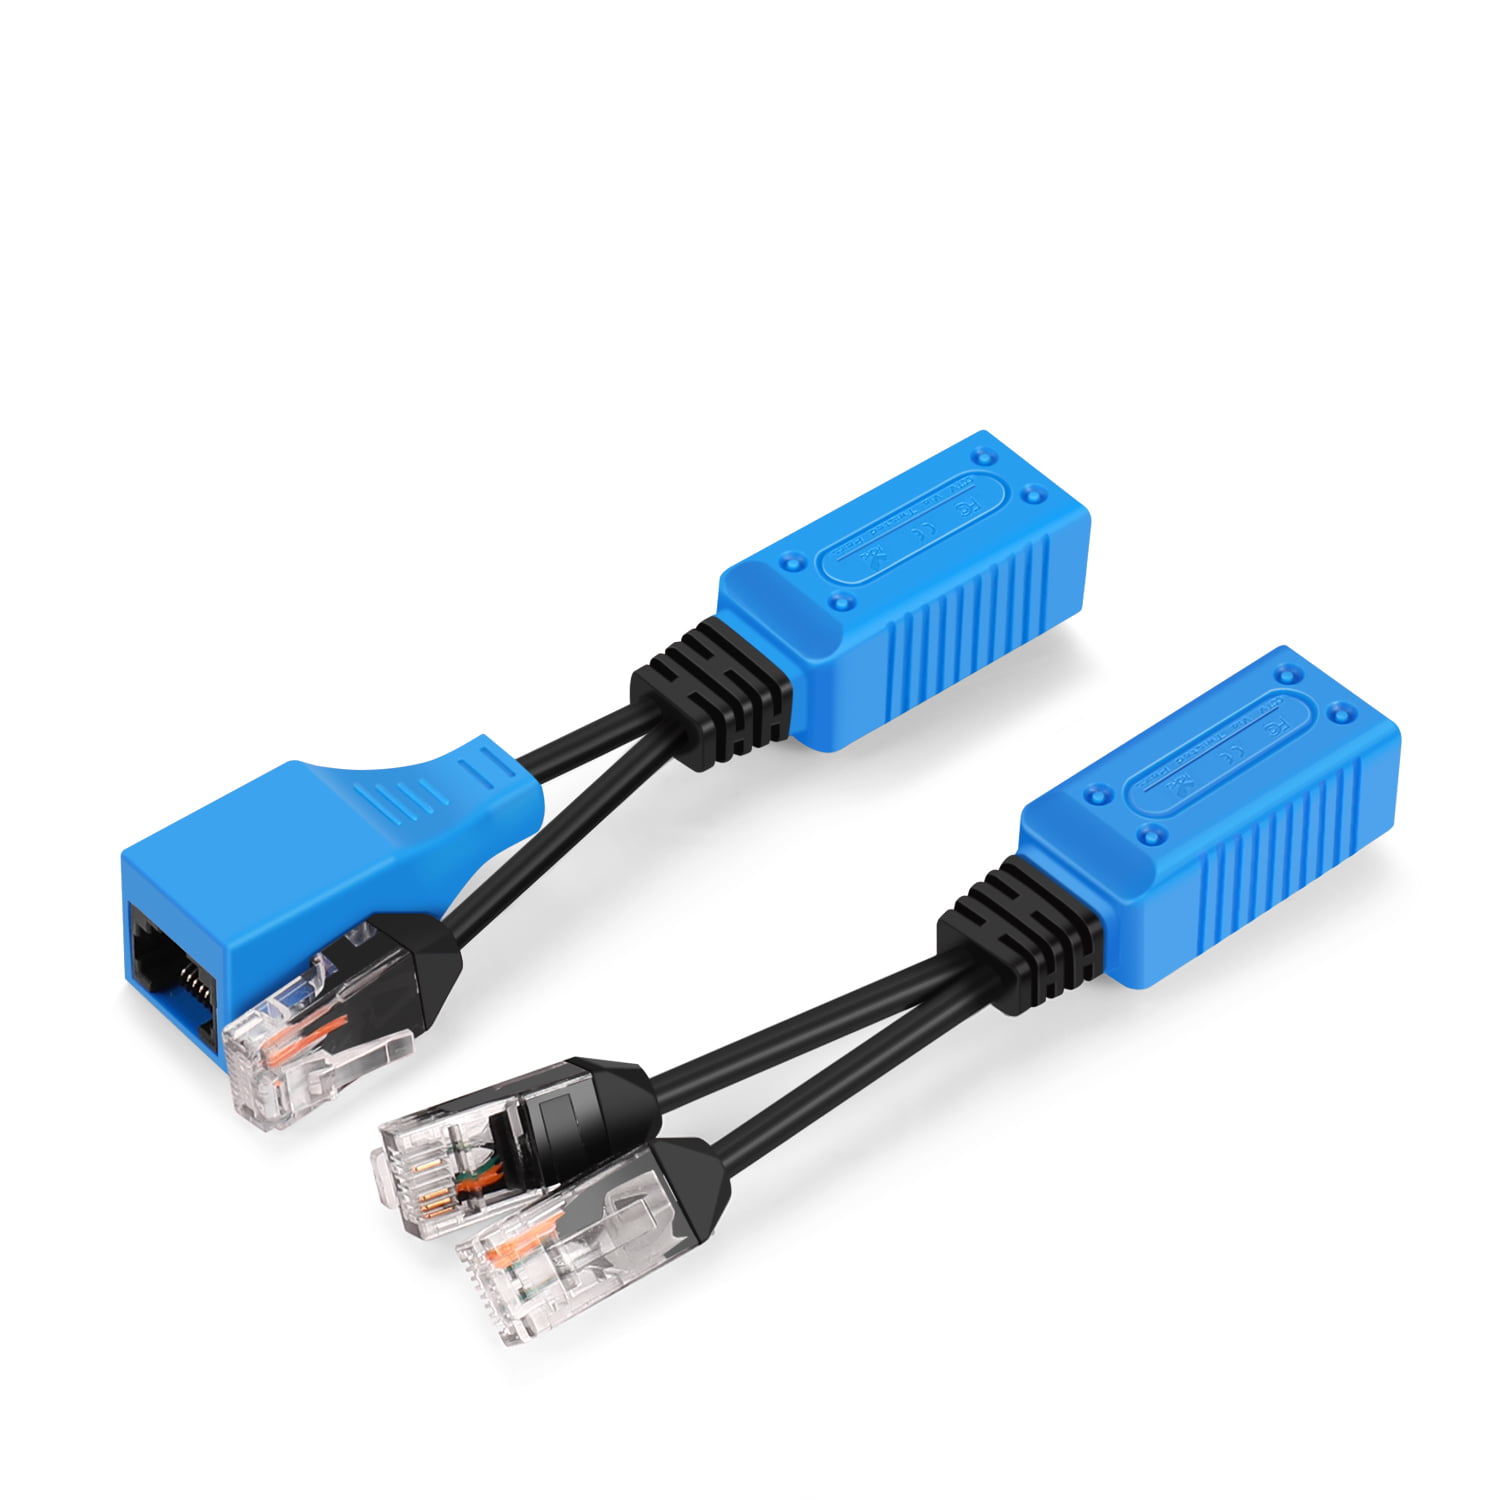 Liccx RJ45 Ethernet Splitter Cable,1 Male to 4 Female RJ45